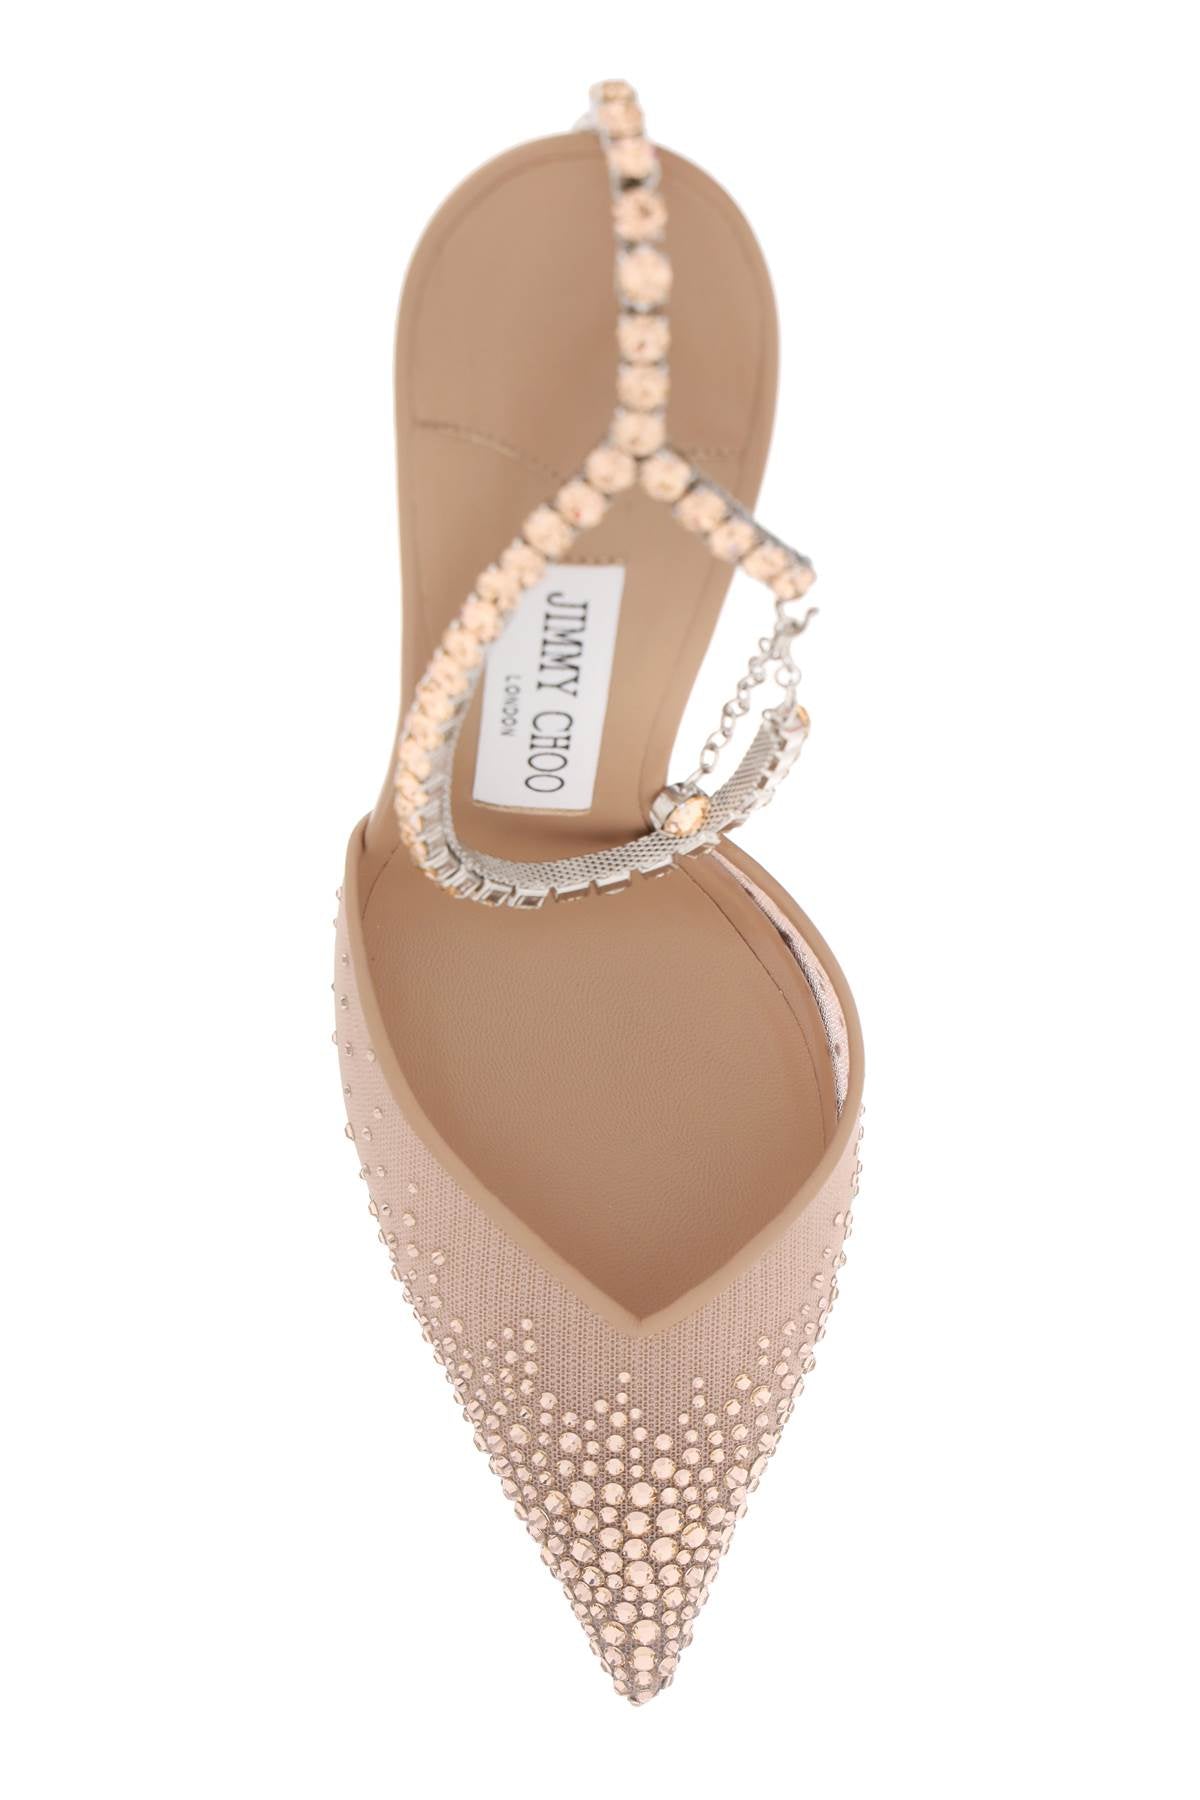 JIMMY CHOO Sparkling Pink Mesh Pumps with Crystals for Women